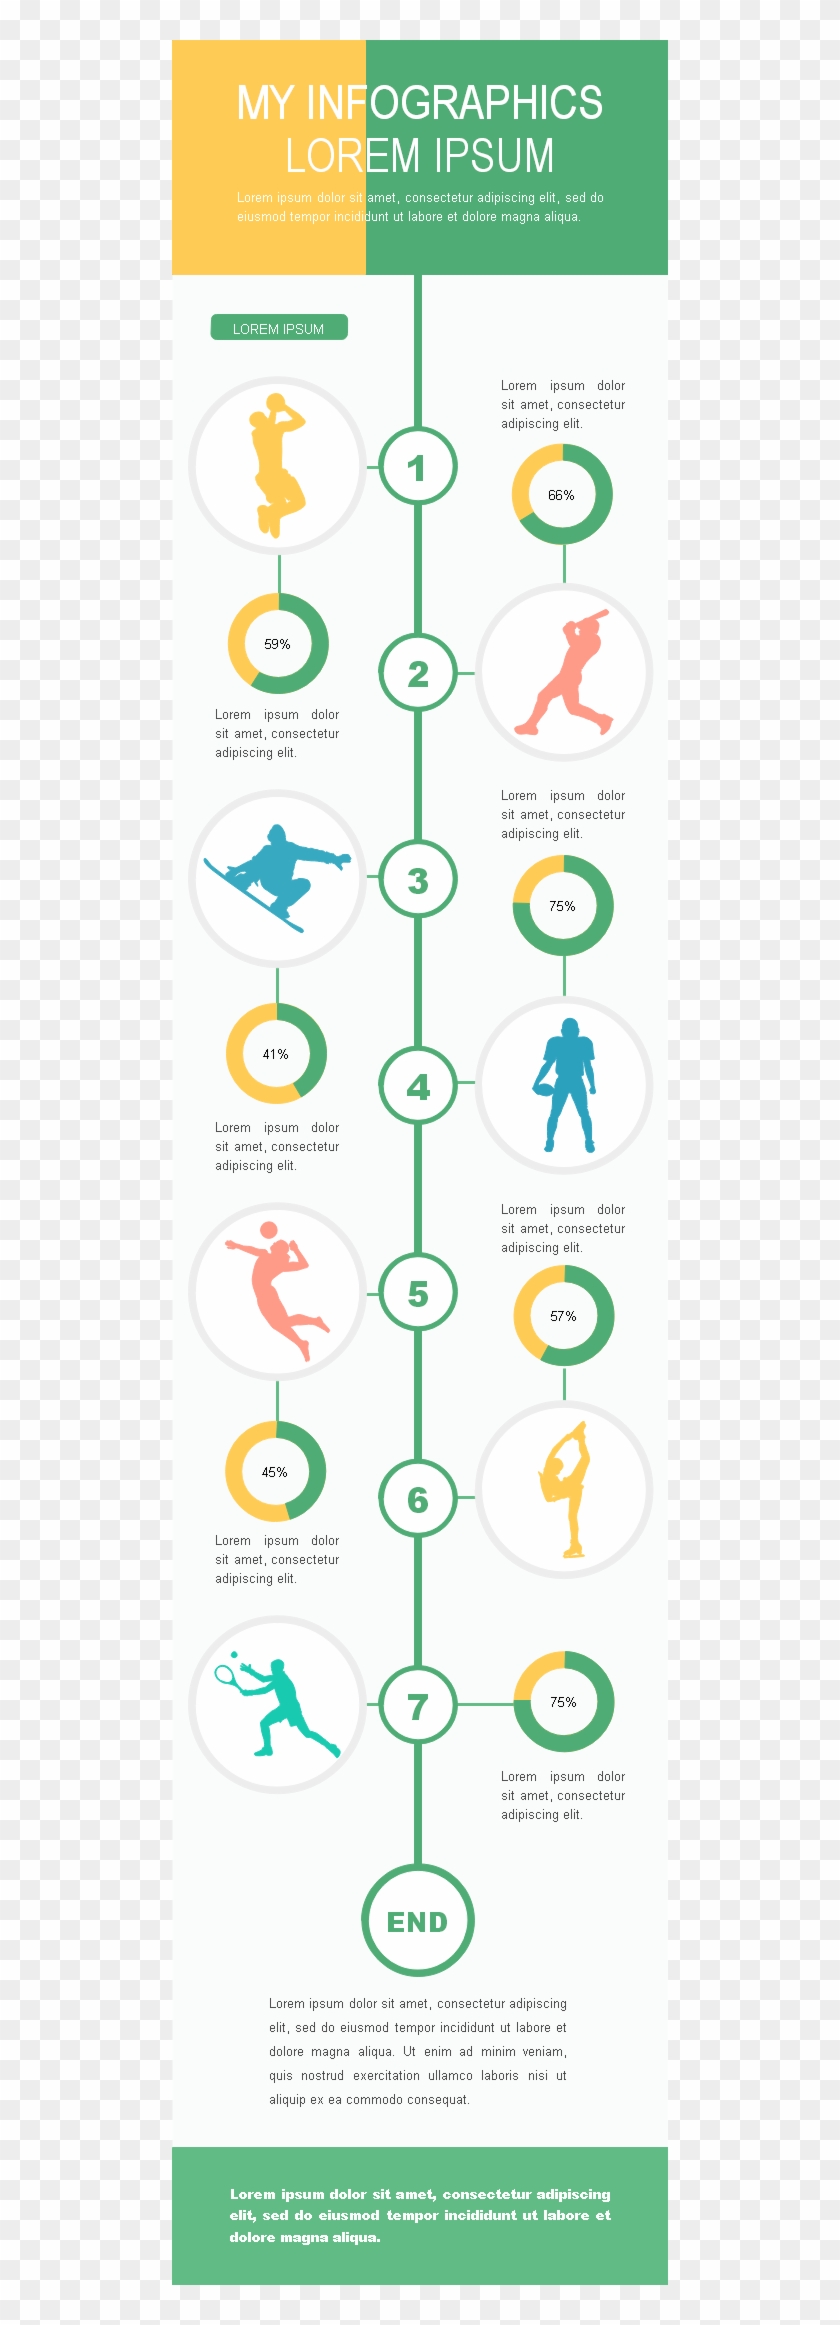 Sports Infographics Example1 - Traffic Rules Infographics Clipart #5672378